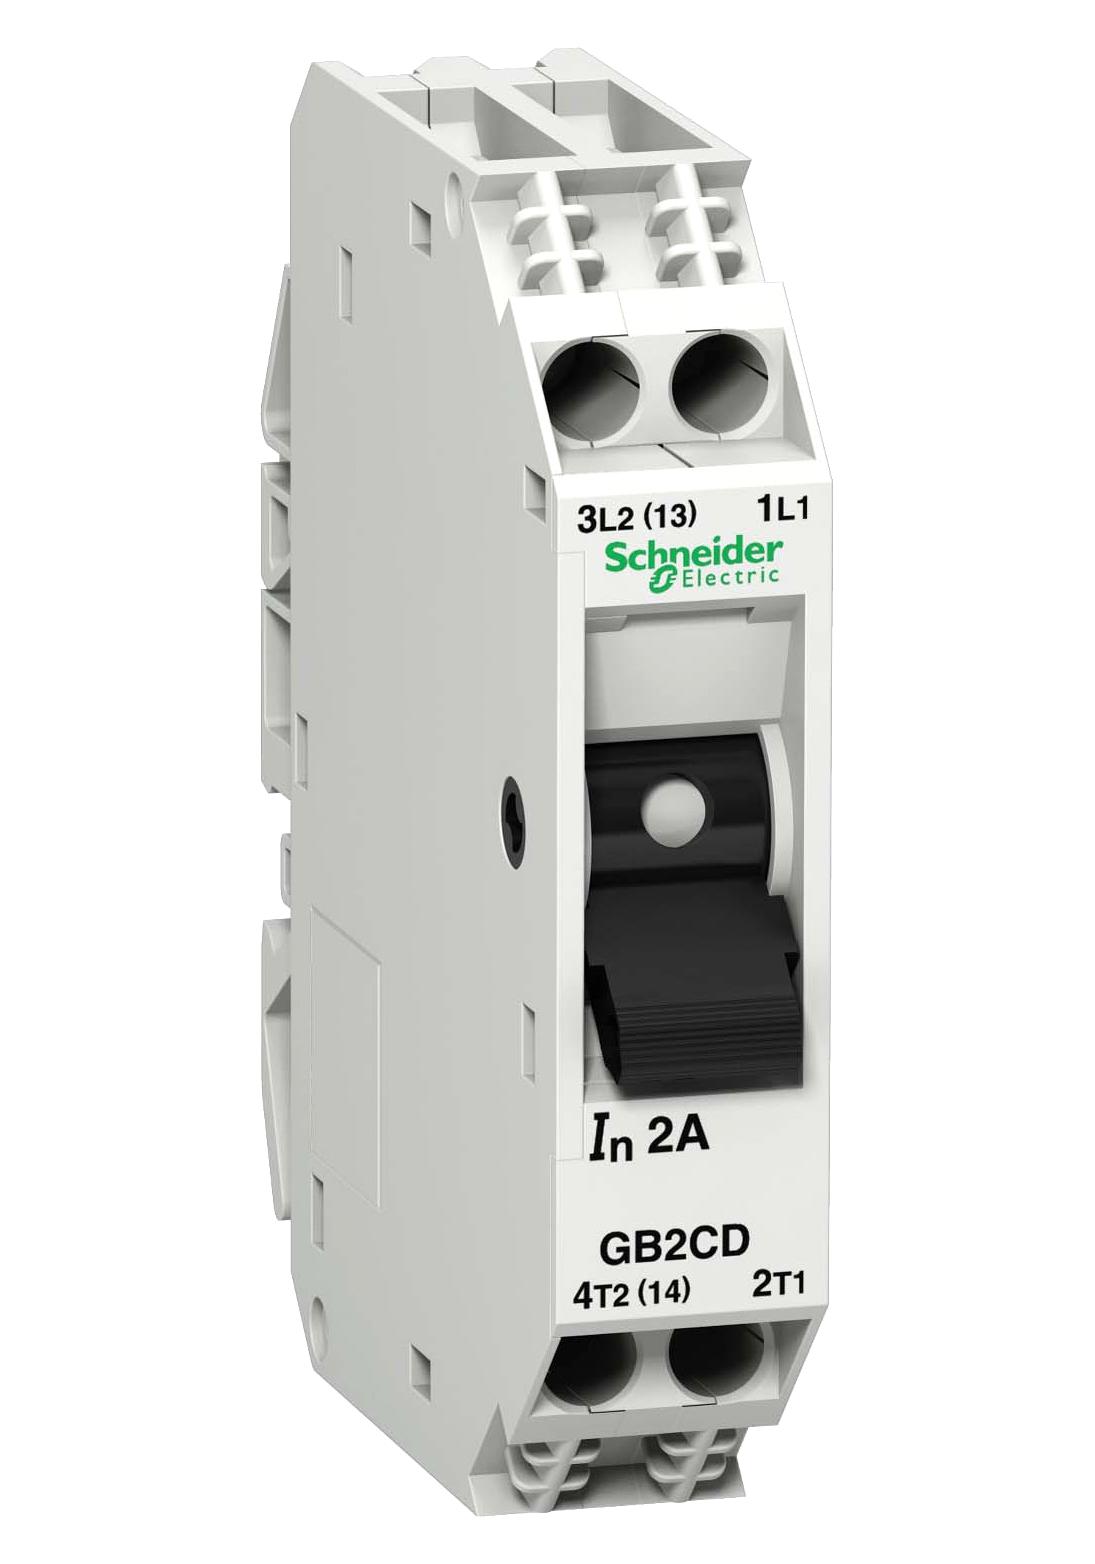 GB2CD10 THERMOMAGNETIC CKT BREAKER, 1P, 5A SCHNEIDER ELECTRIC